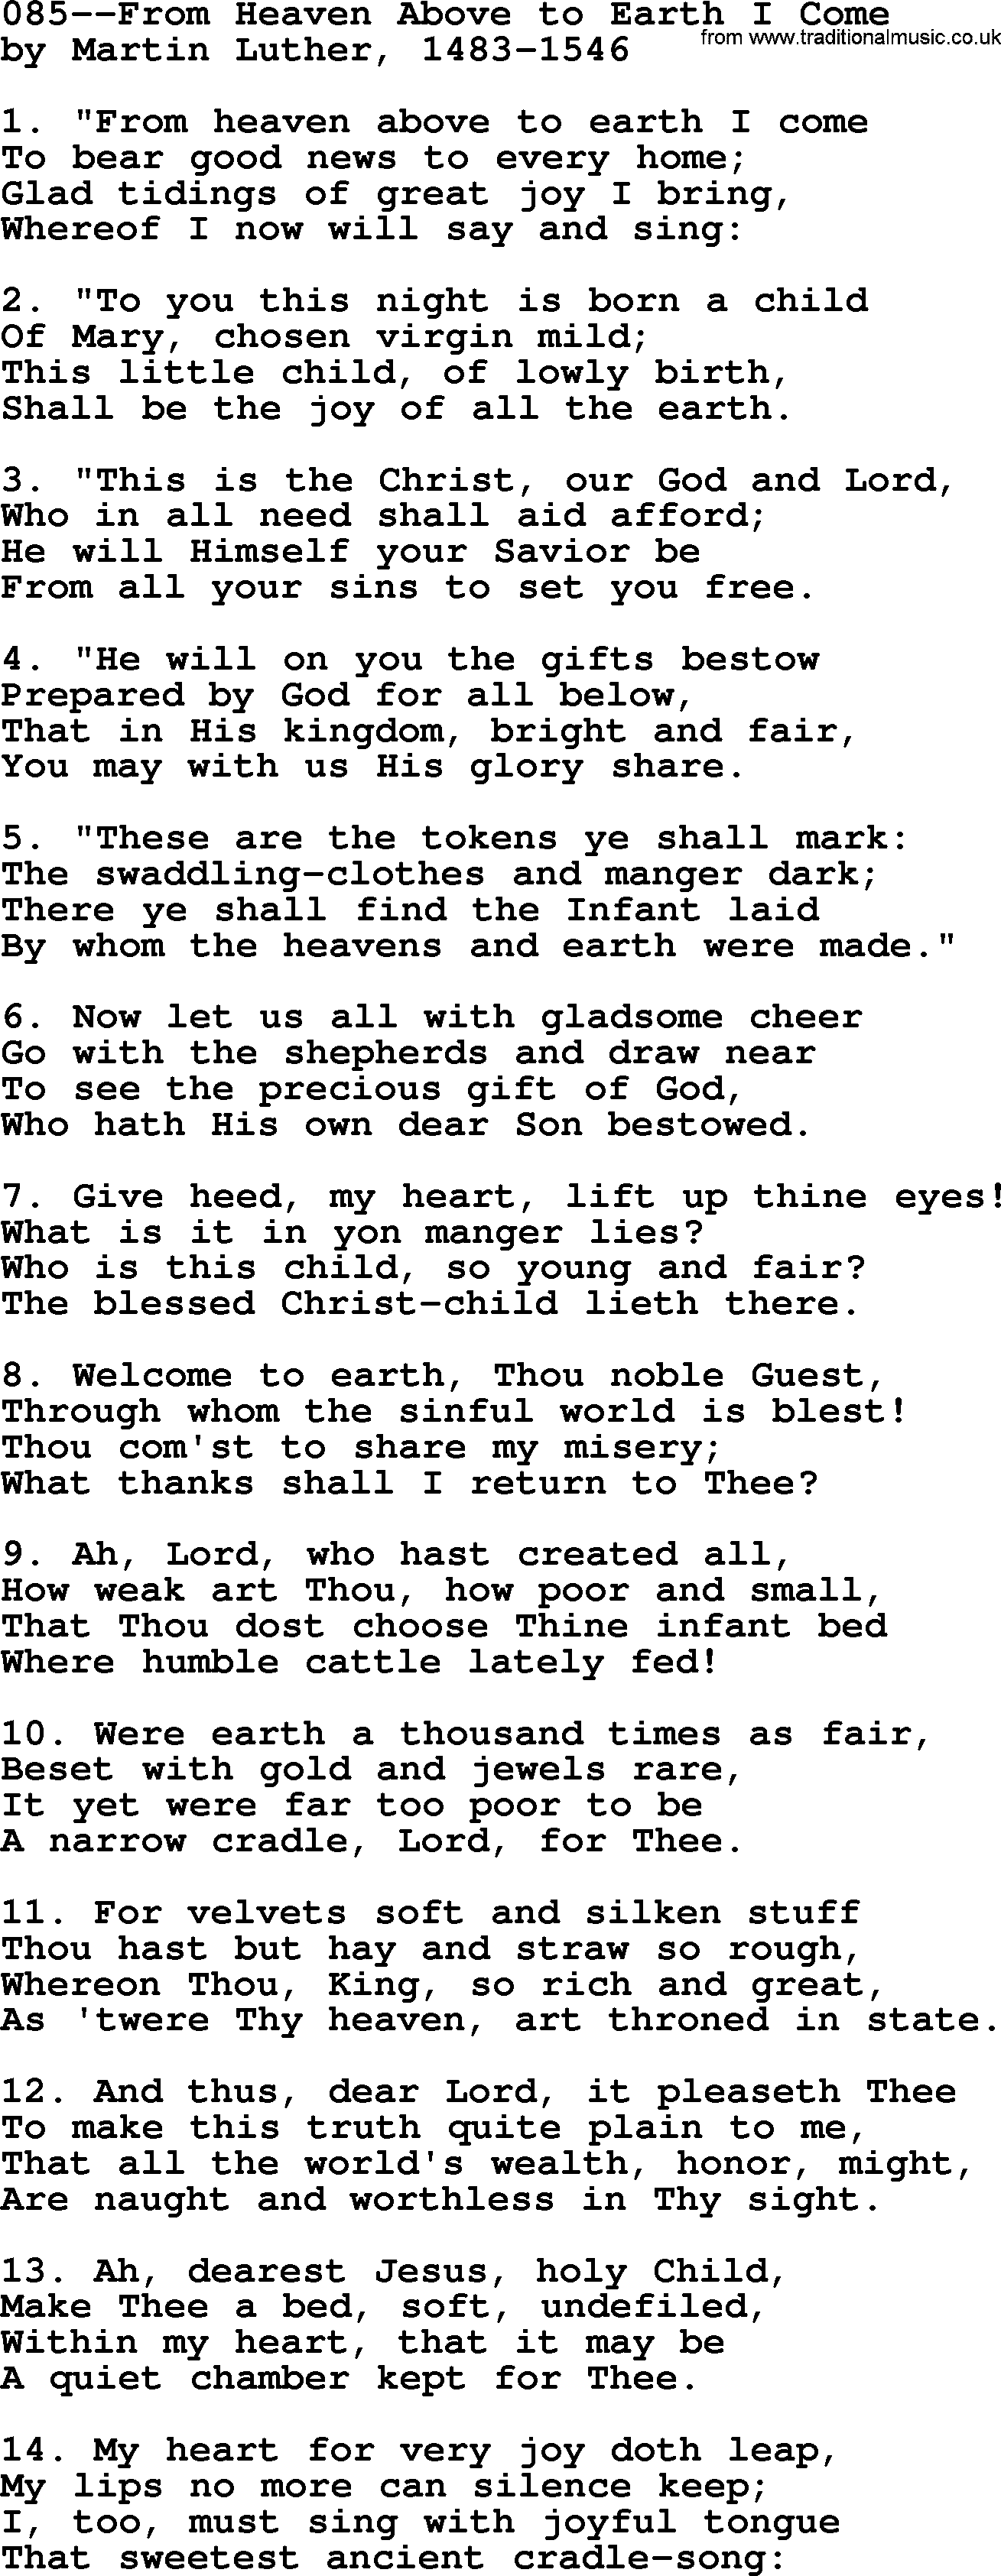 Lutheran Hymn: 085--From Heaven Above to Earth I Come.txt lyrics with PDF